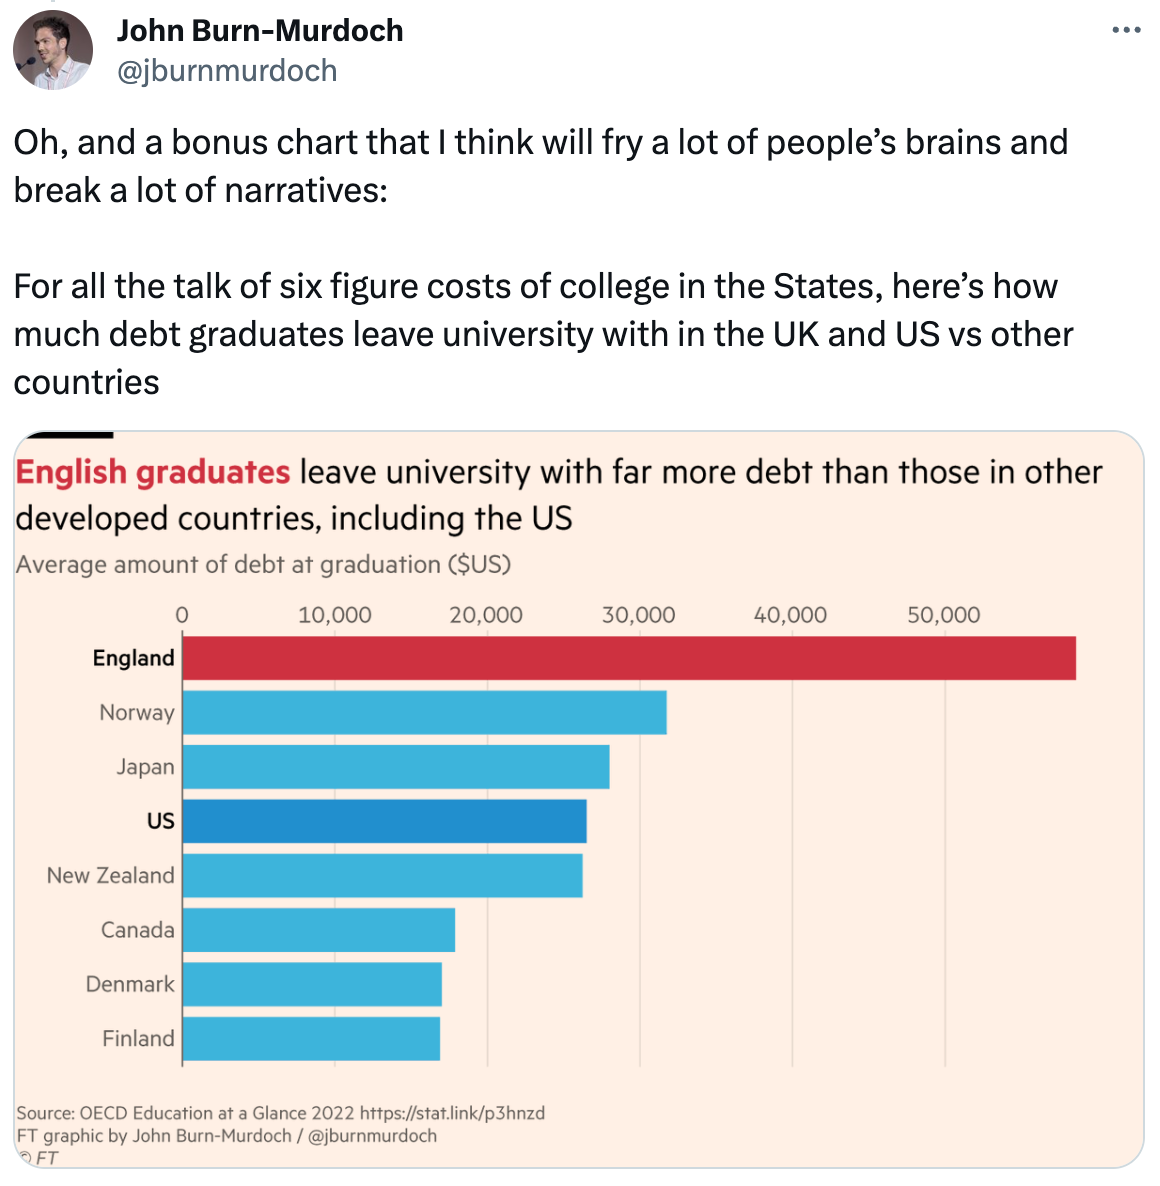  John Burn-Murdoch @jburnmurdoch Oh, and a bonus chart that I think will fry a lot of people’s brains and break a lot of narratives:  For all the talk of six figure costs of college in the States, here’s how much debt graduates leave university with in the UK and US vs other countries